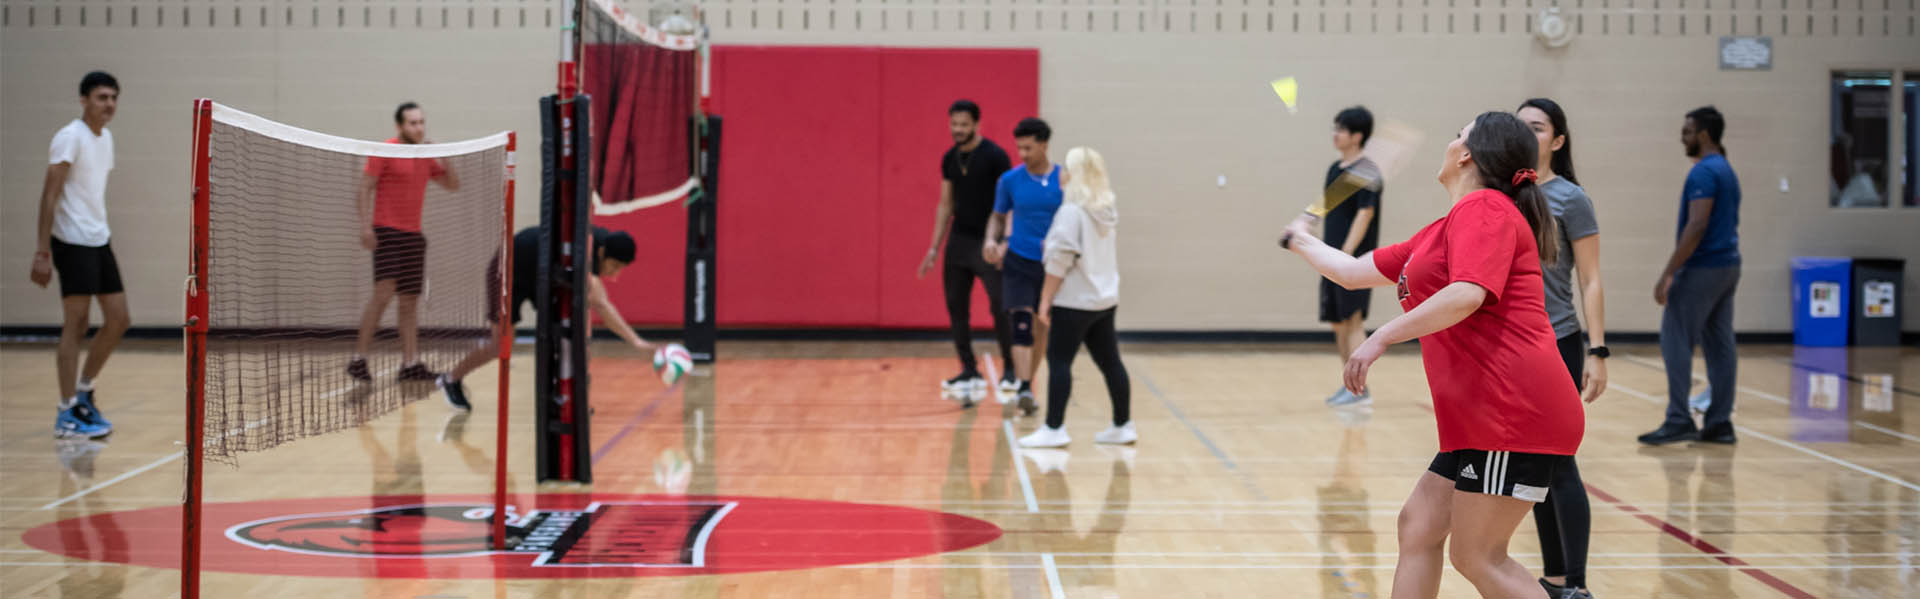 Photo of students play volleyball inside a gym